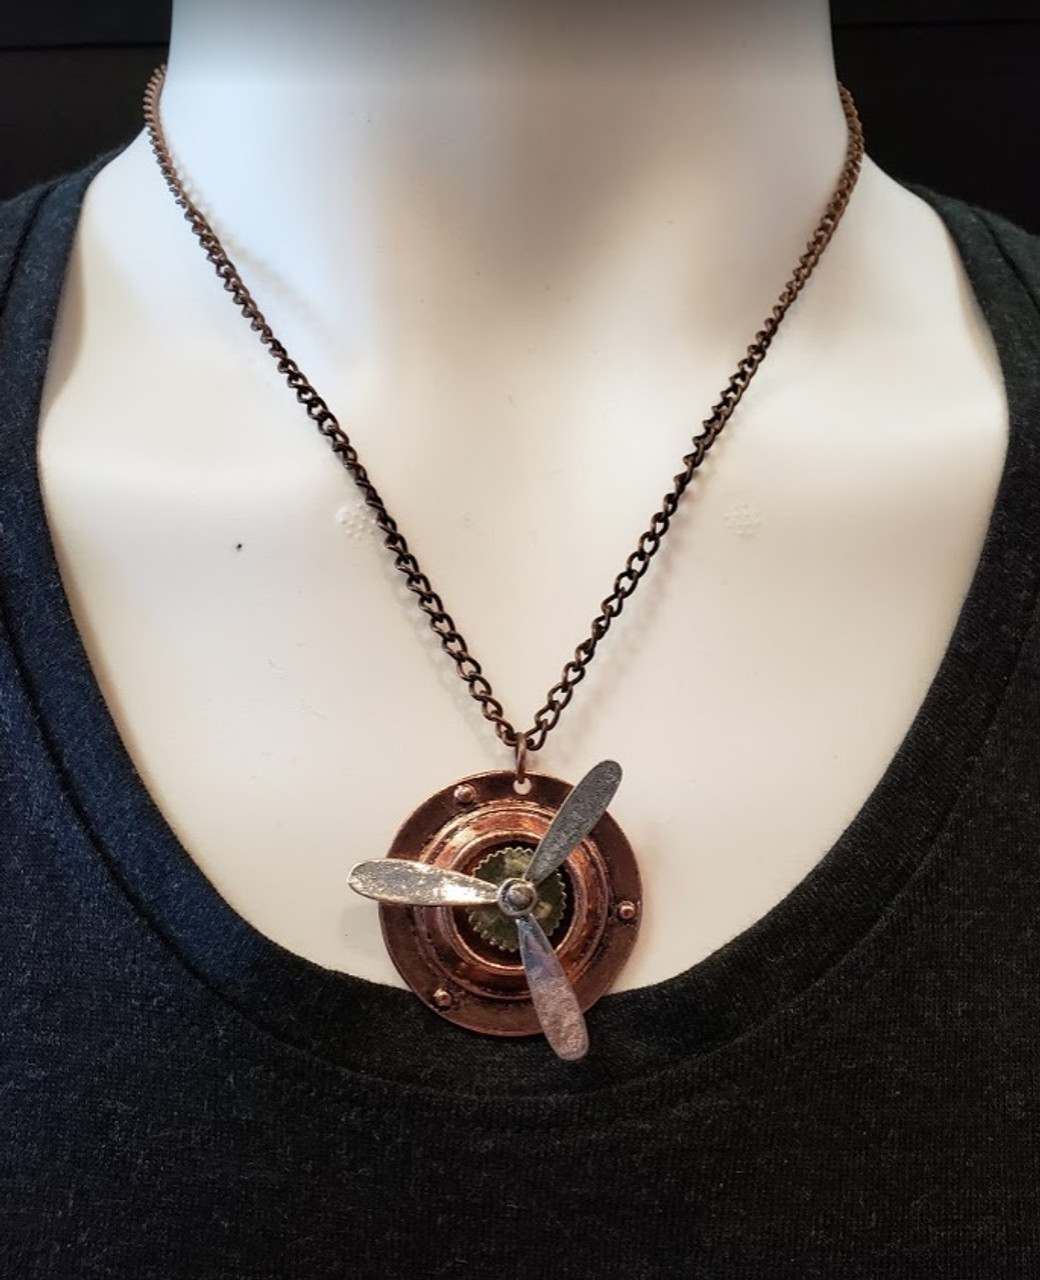 Necklace - Spinning propeller rose-gold colour